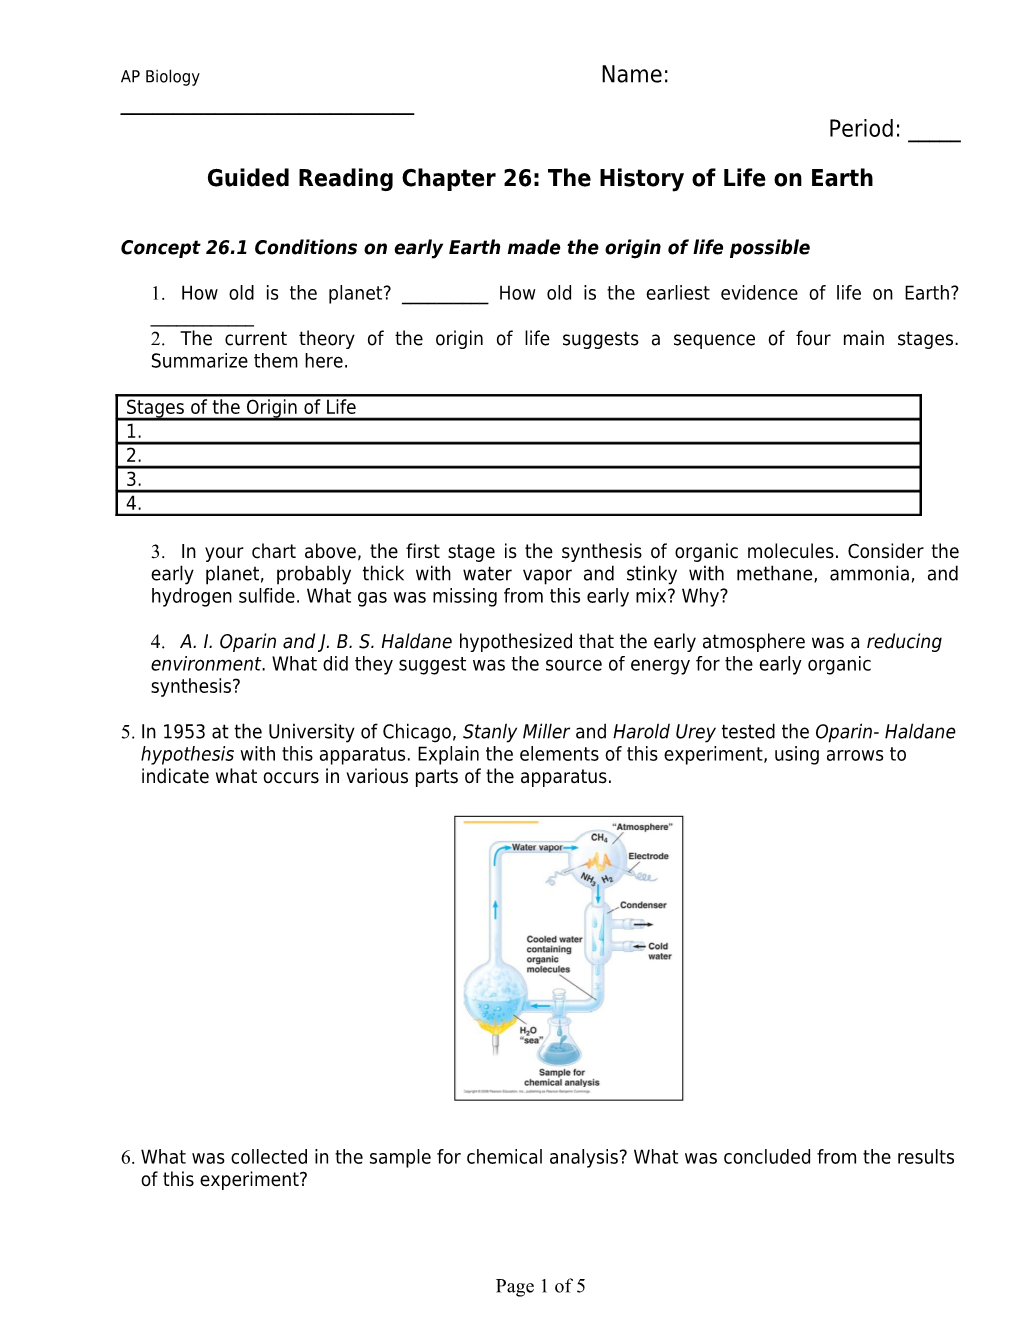 Guided Reading Chapter 26: the History of Life on Earth